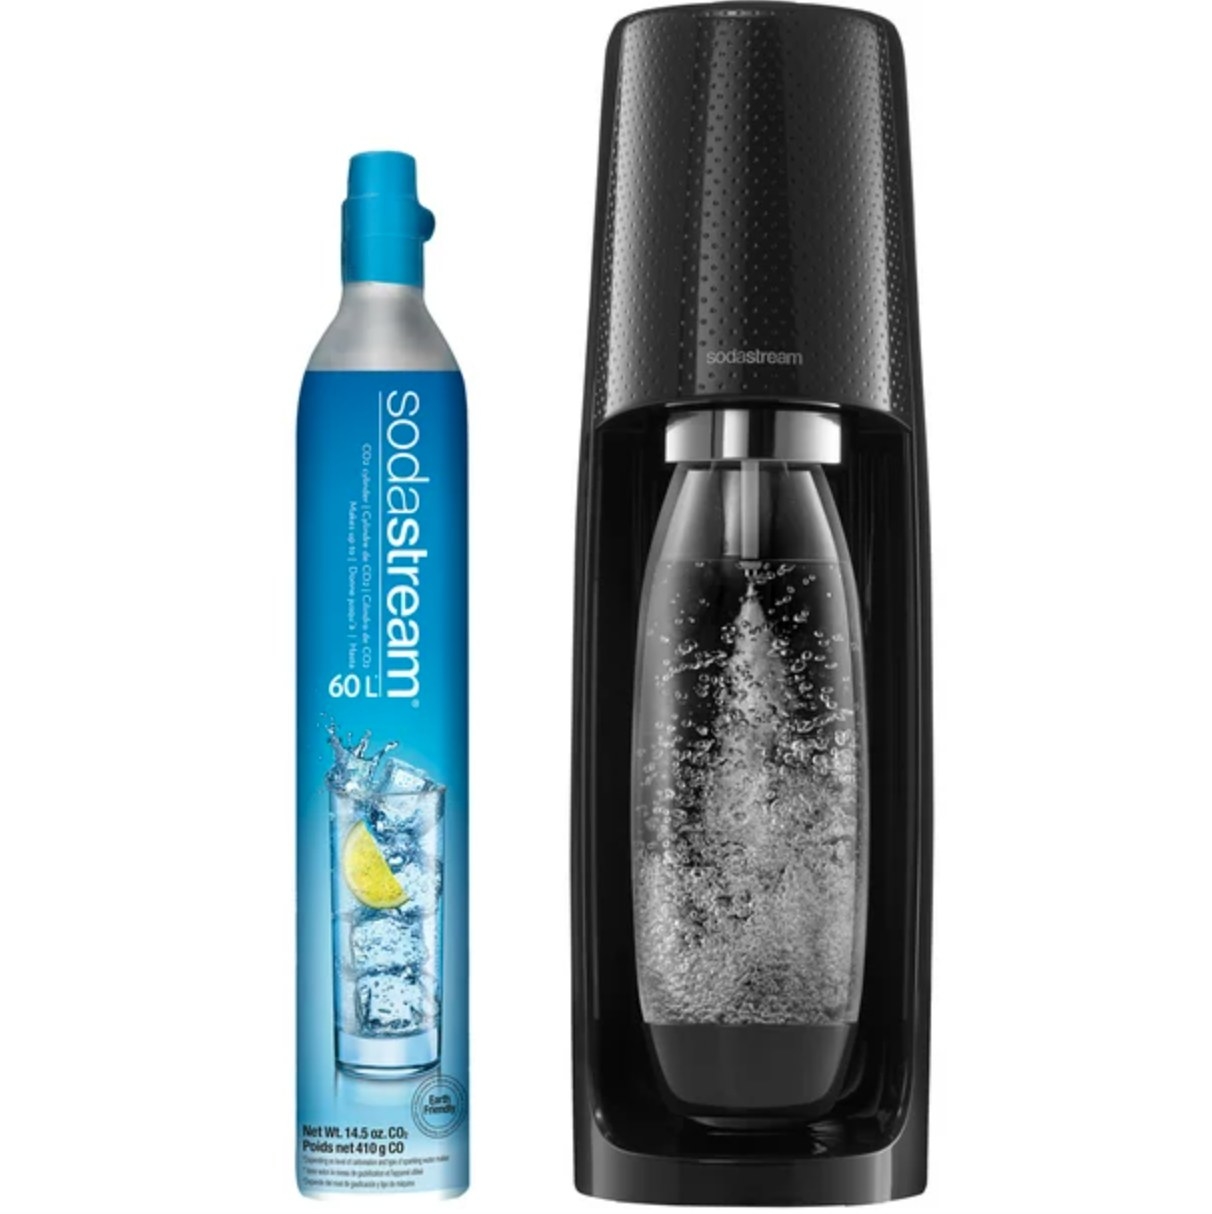 the blue carbonation bottle next to the black soda stream